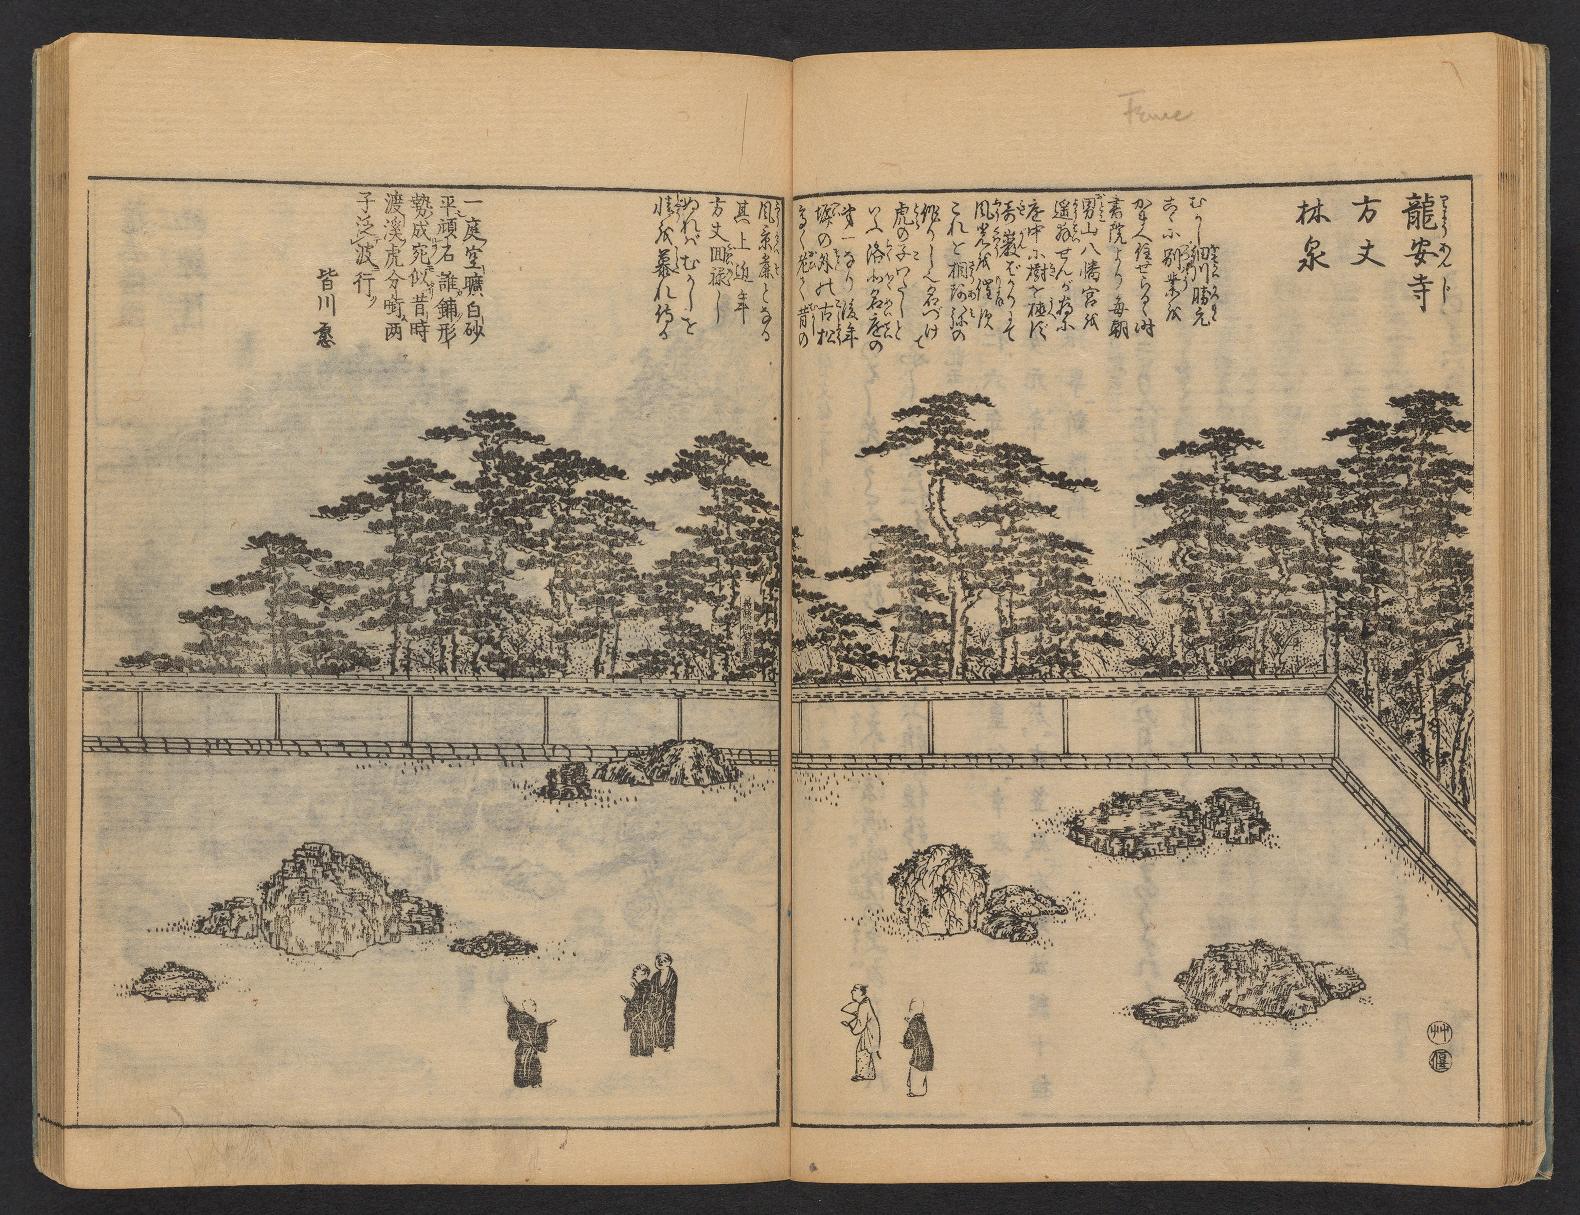 Lonely Planet in Edo-period Japan: Meisho Zue